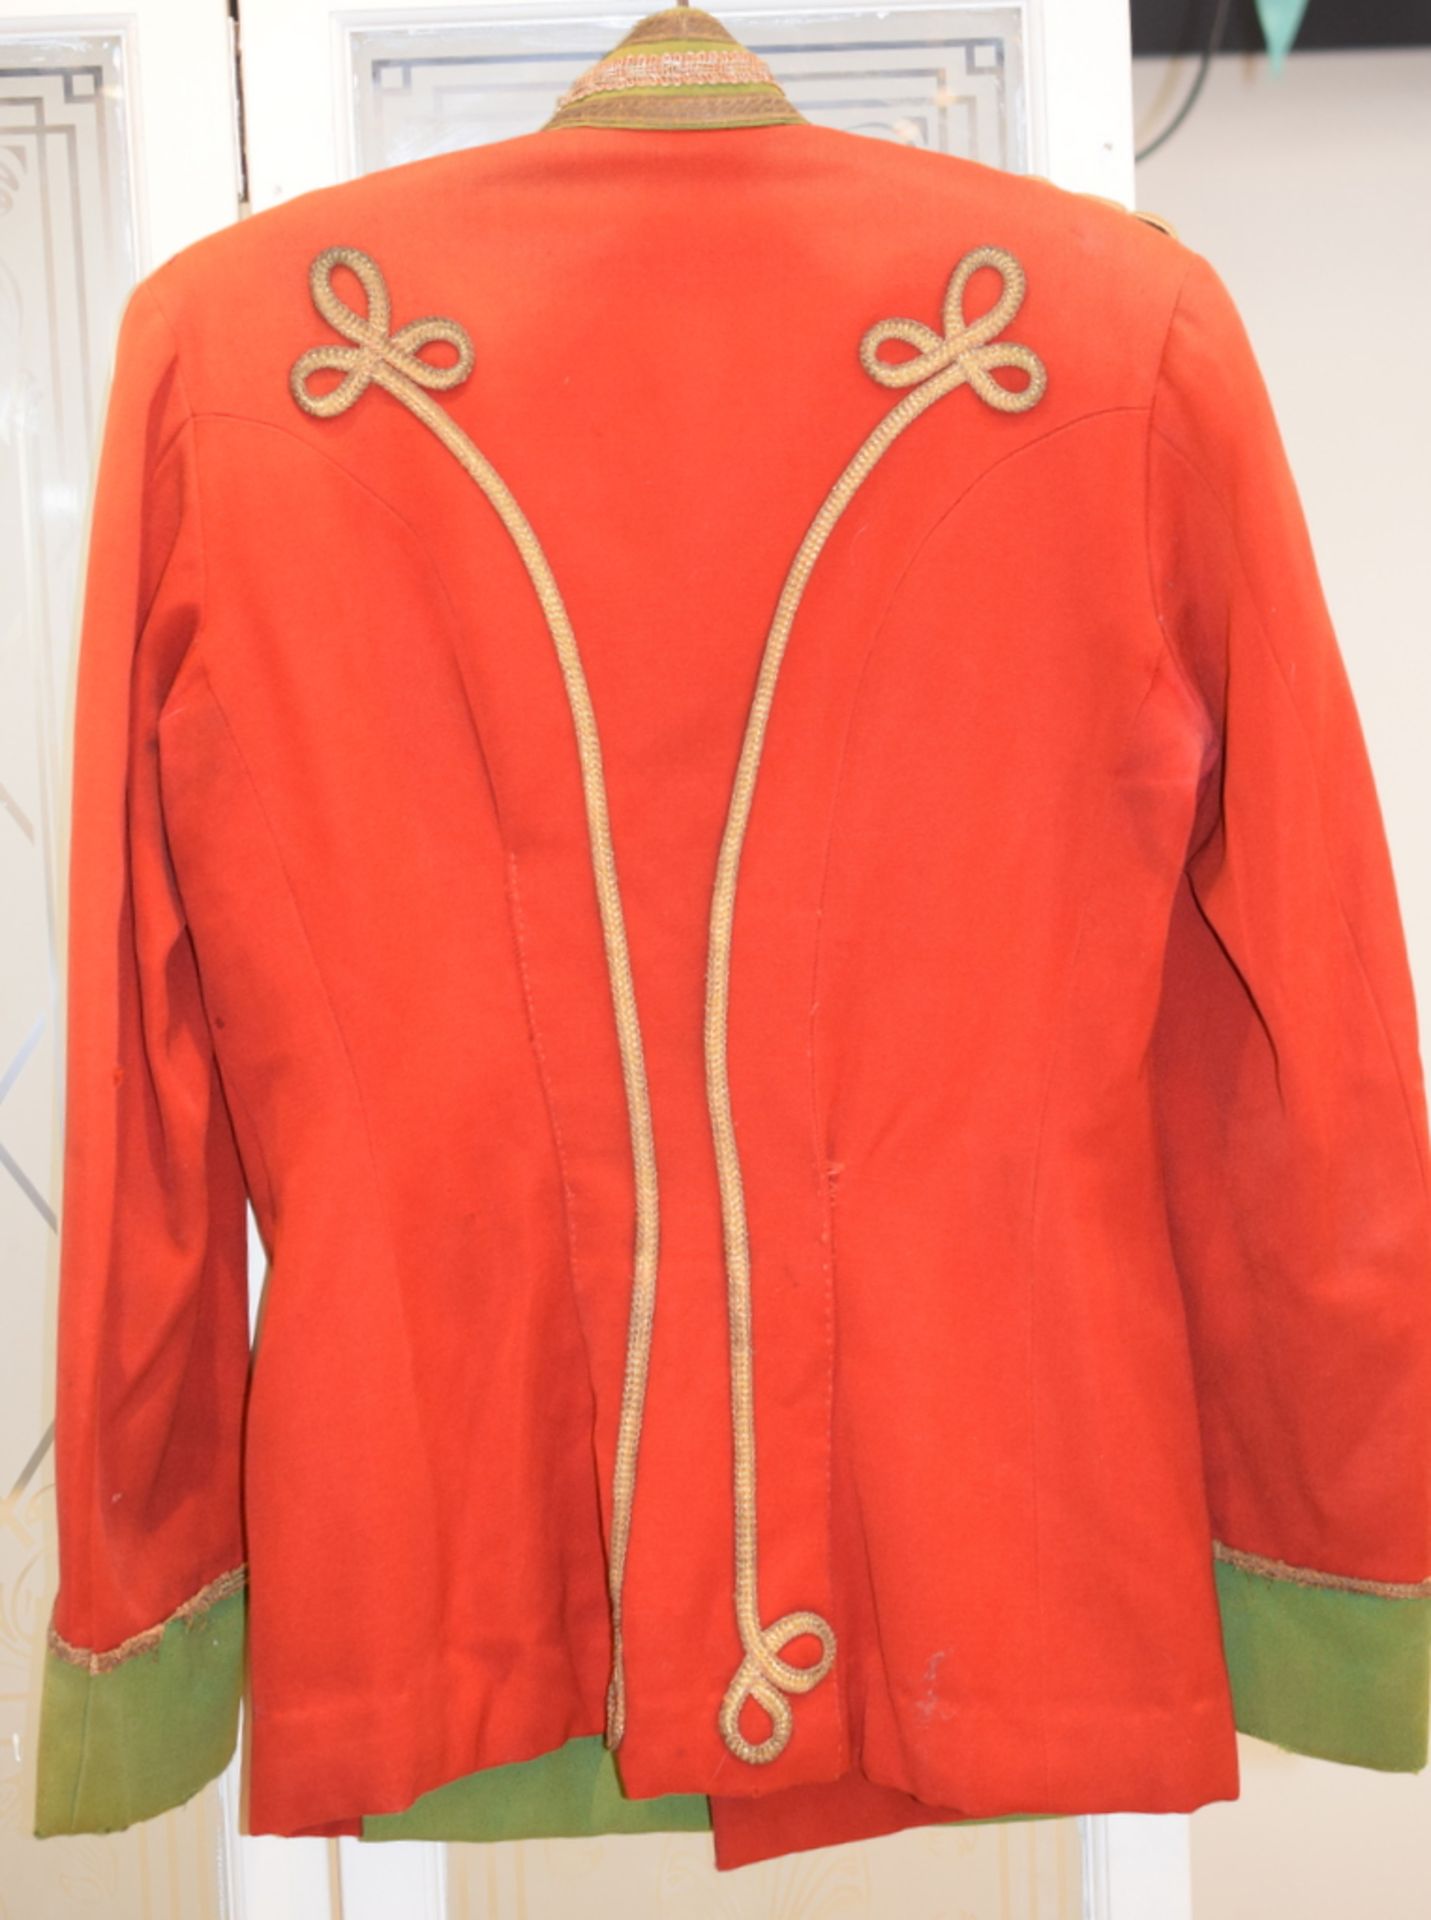 Antique Military Jacket In Red With Green Panelling c1840/60s - Image 3 of 7